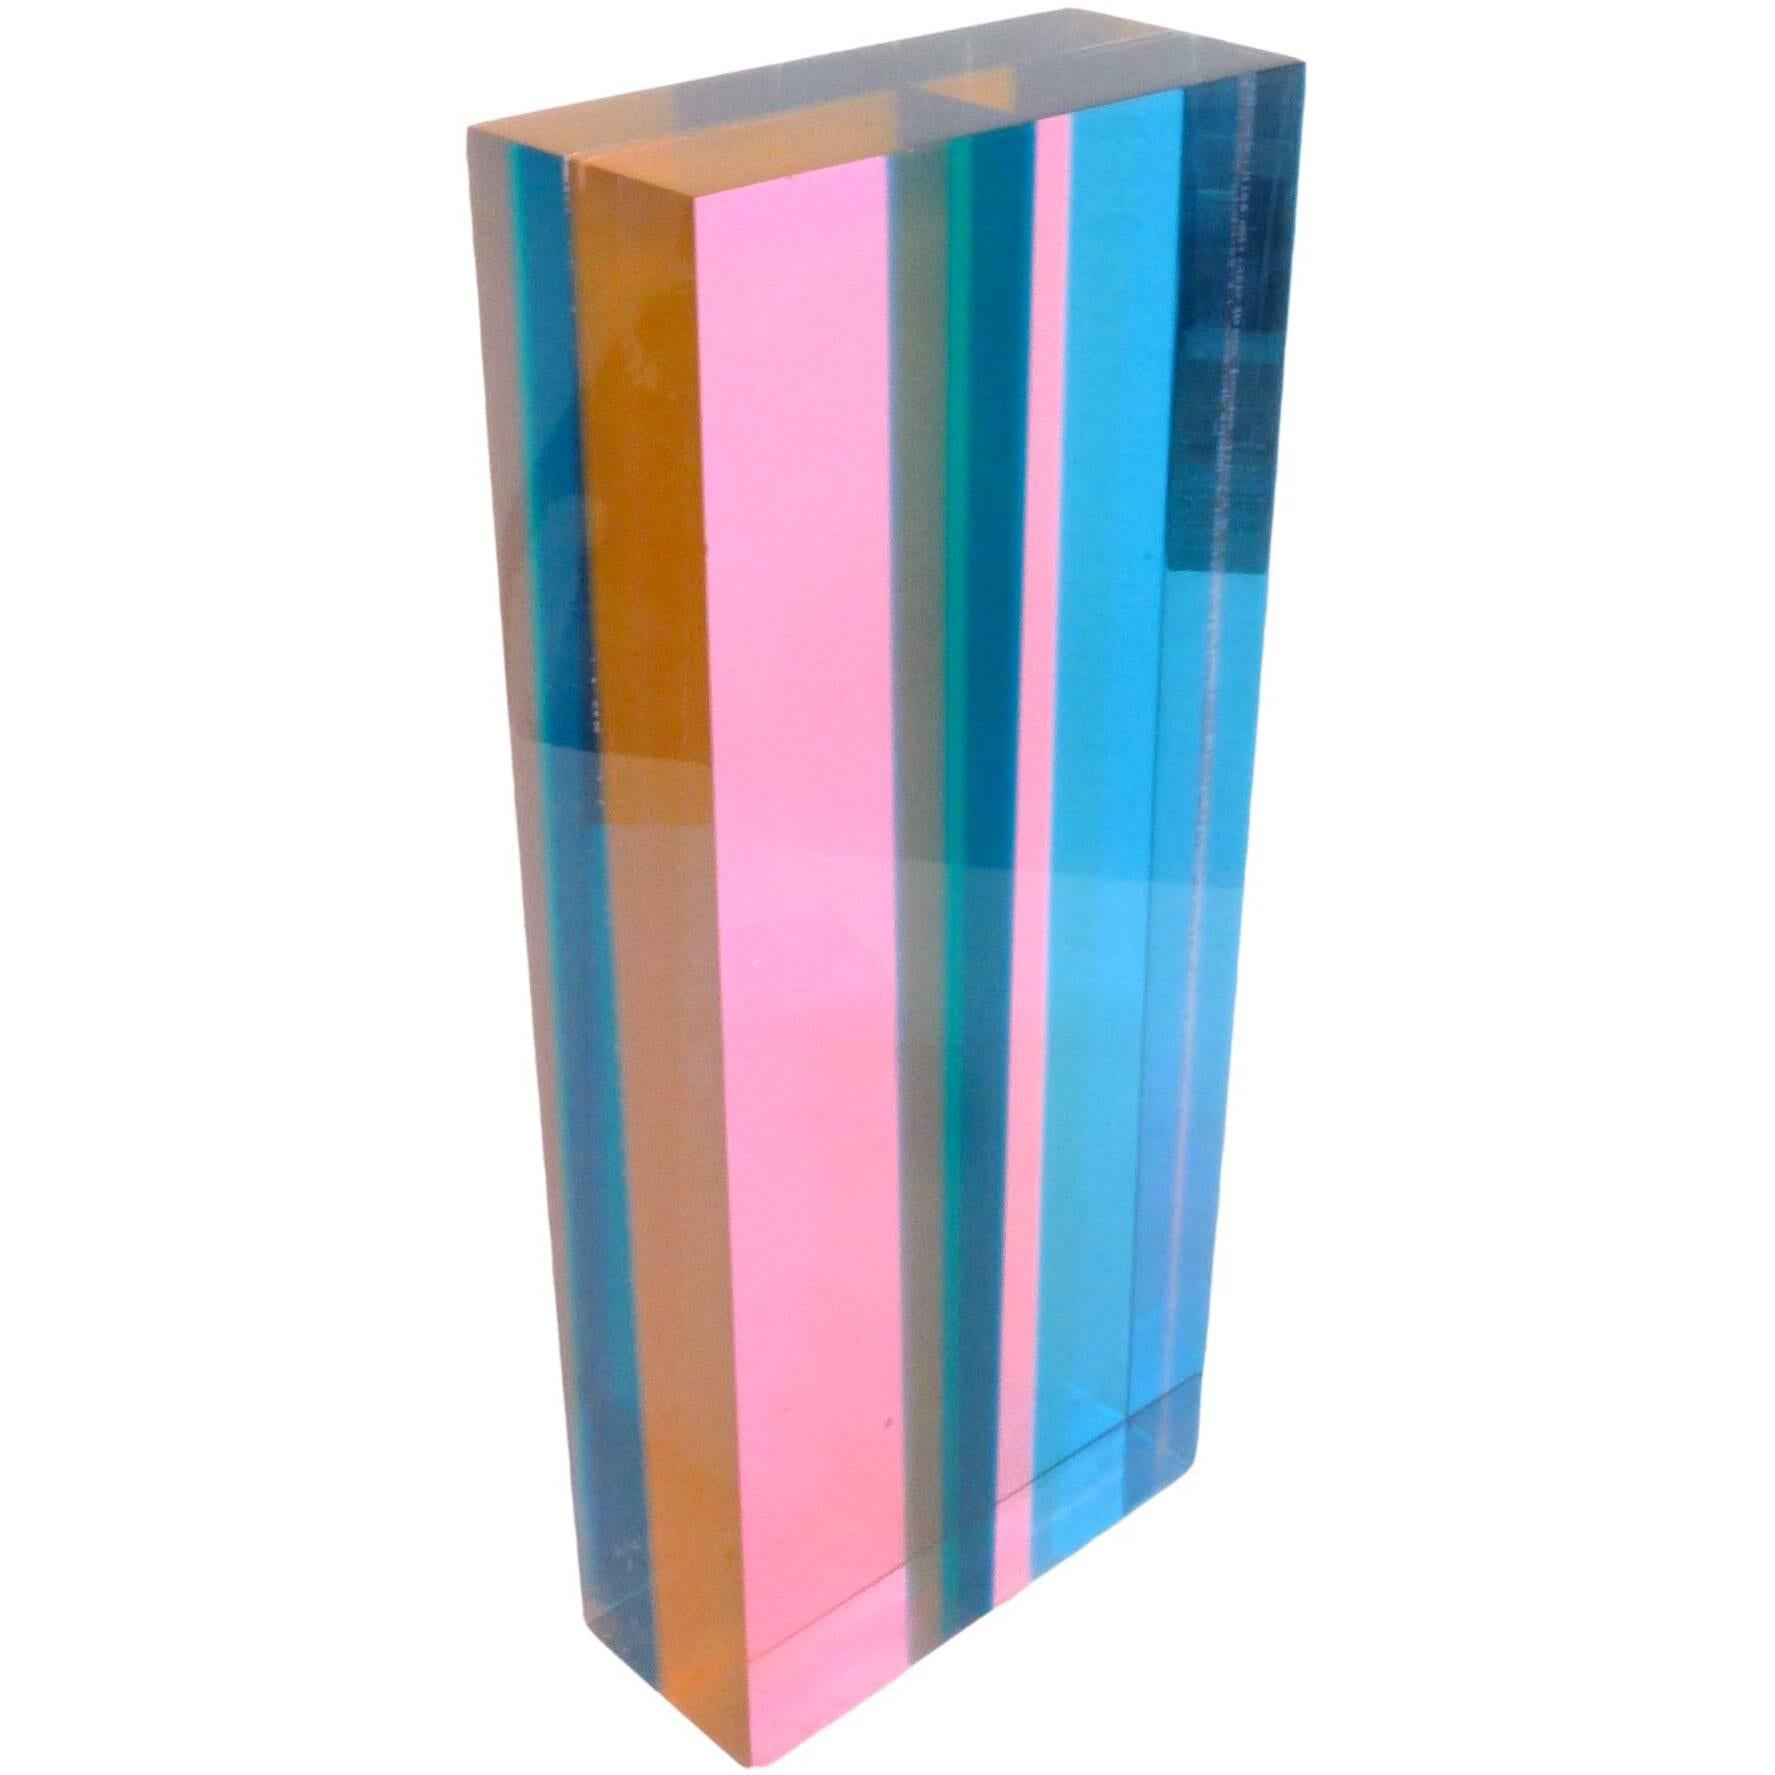 Mulit-Color Acrylic Sculpture by Vasa Mihich